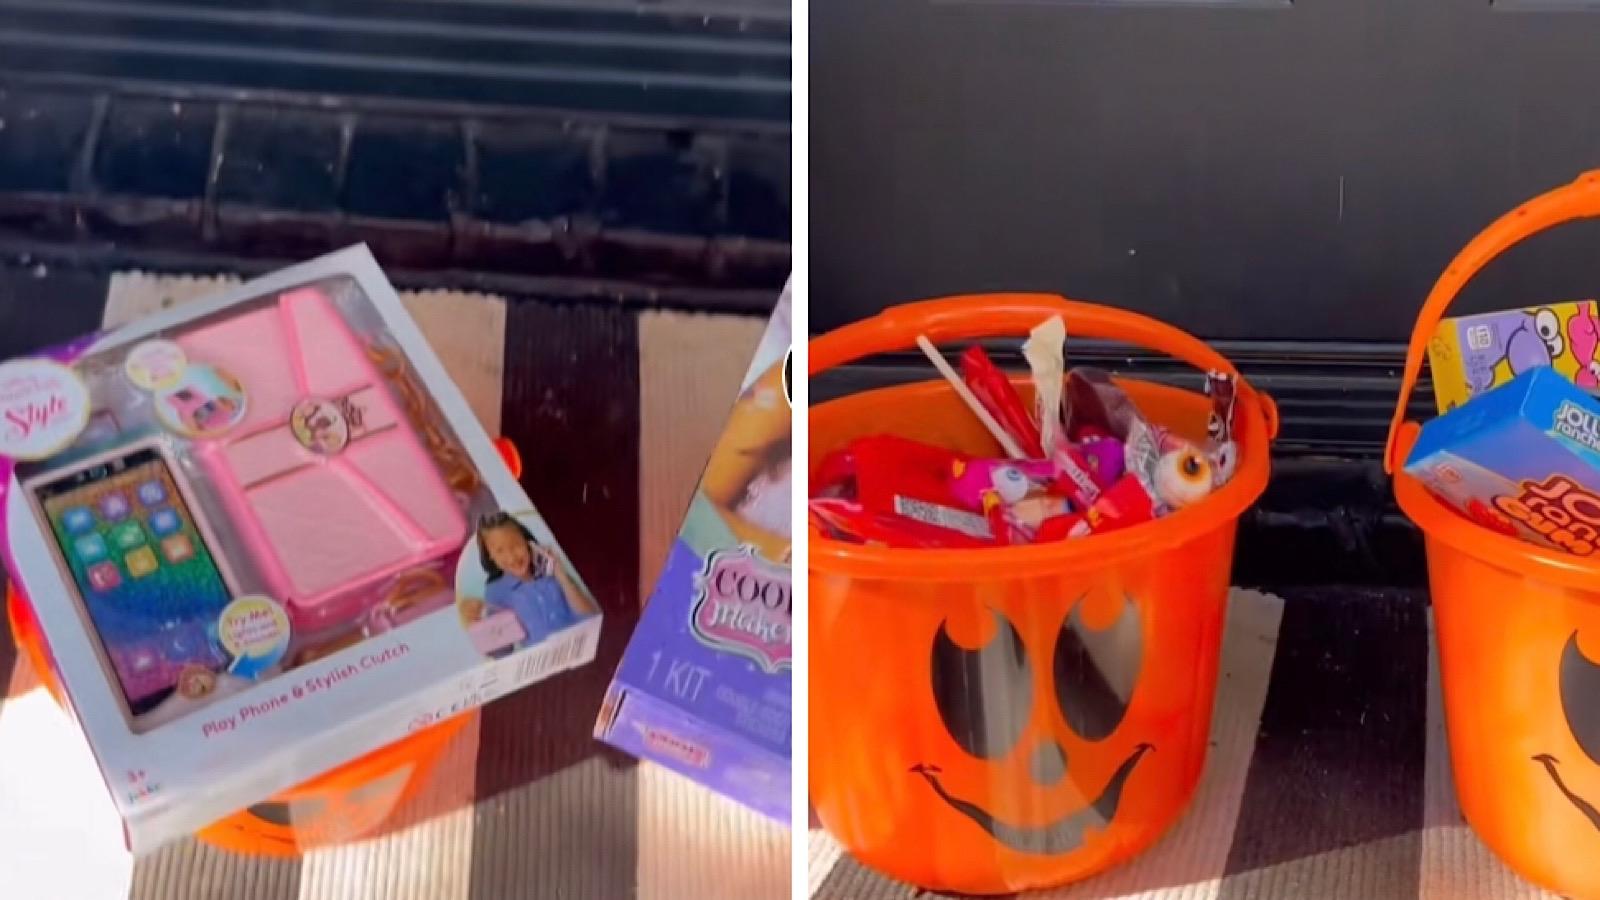 parents started a new halloween trend for their kids called "switch witch"